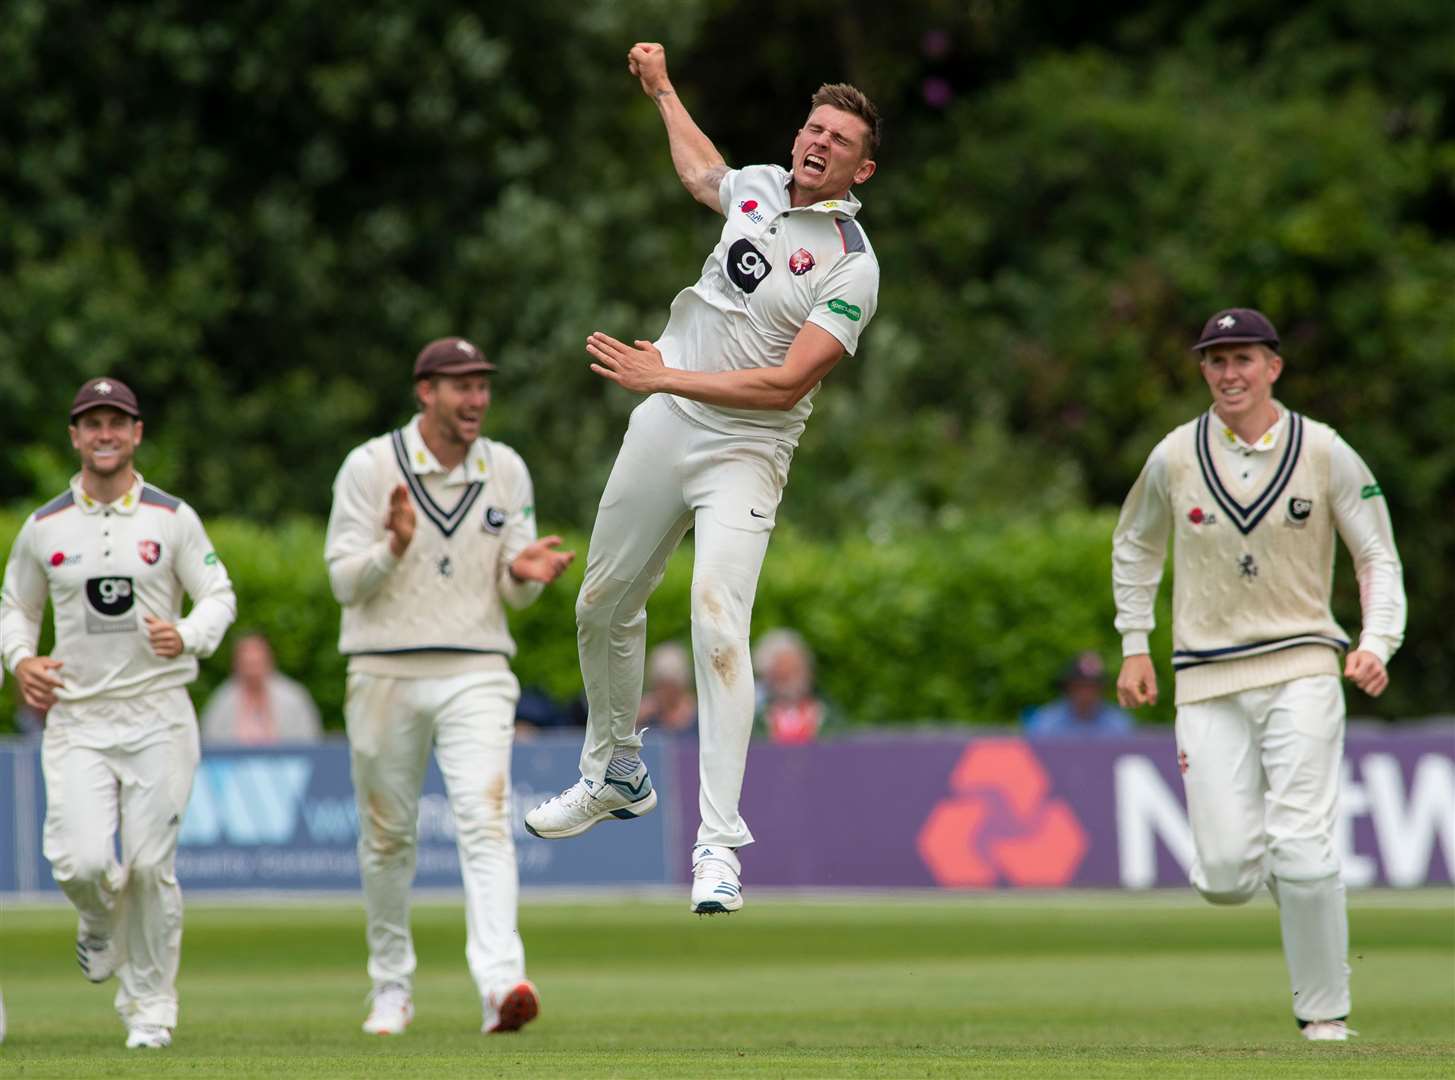 Kent bowler Harry Podmore will be hoping for more celebrations like this in 2021. Picture: Ady Kerry